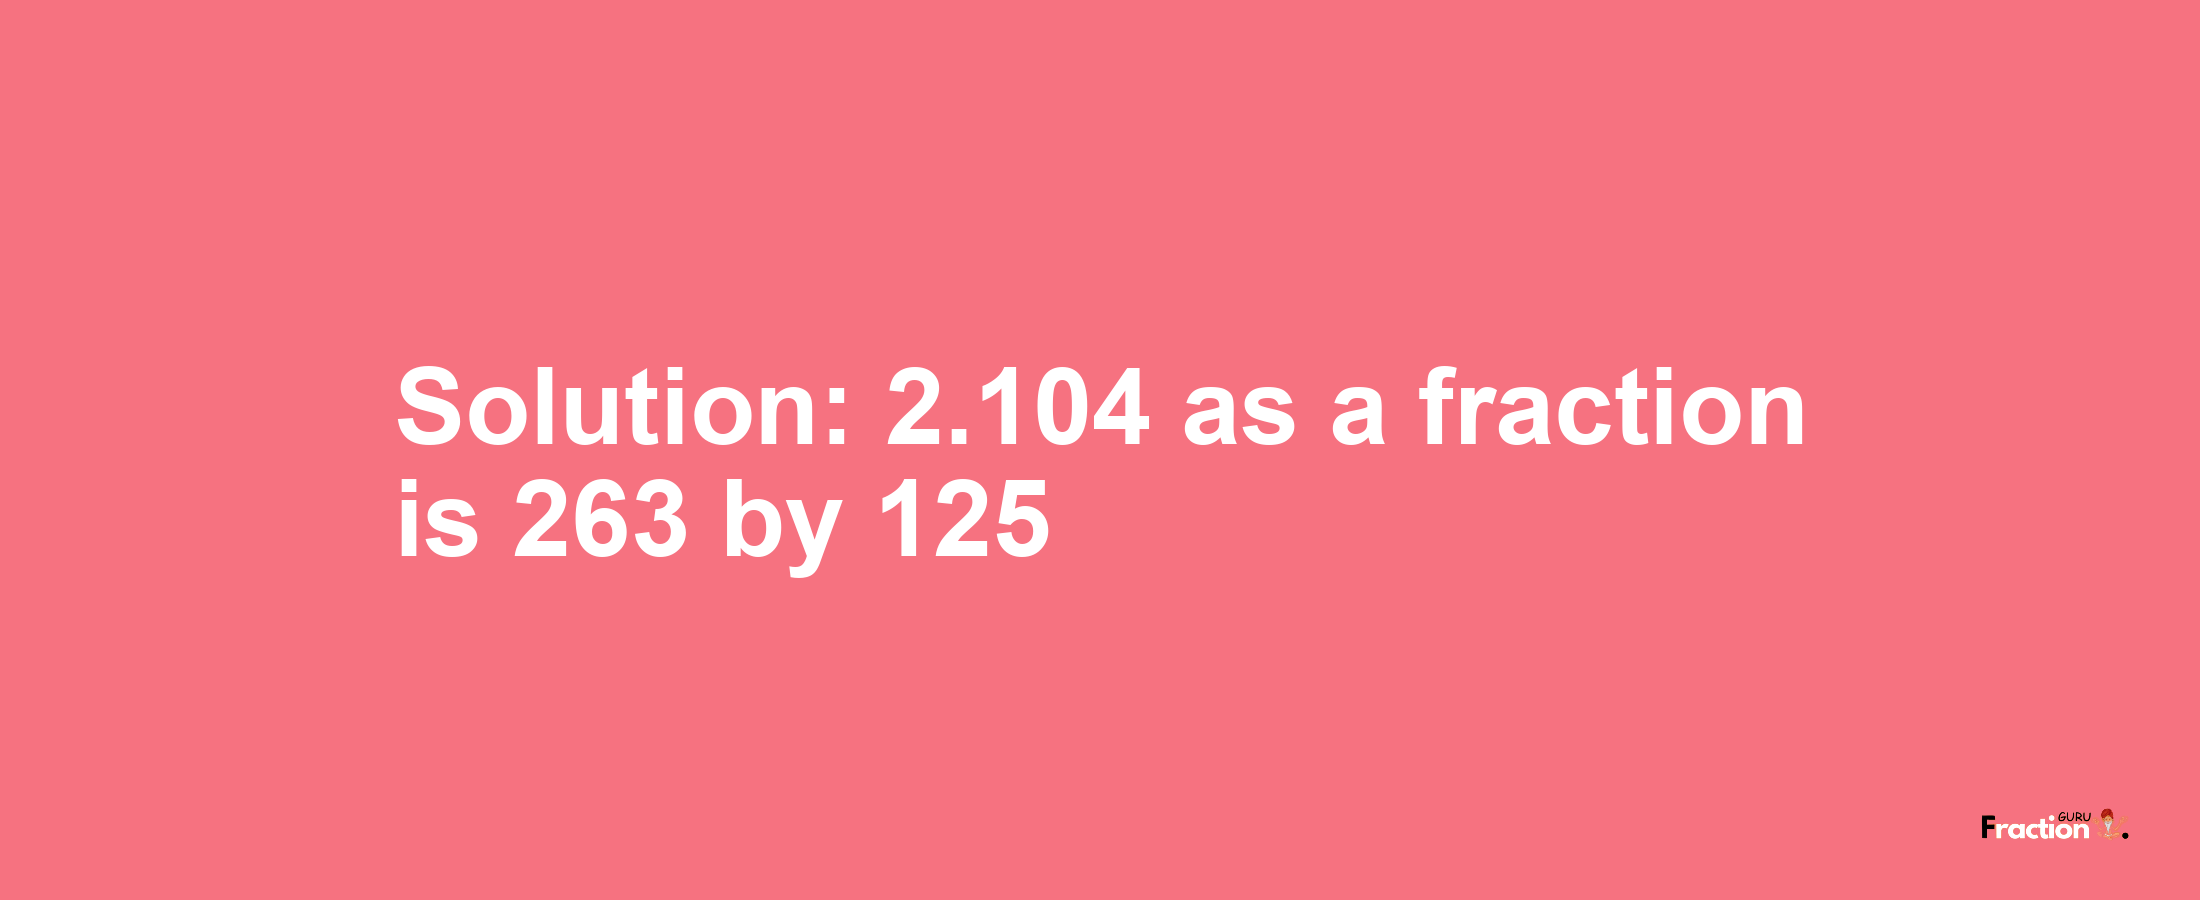 Solution:2.104 as a fraction is 263/125